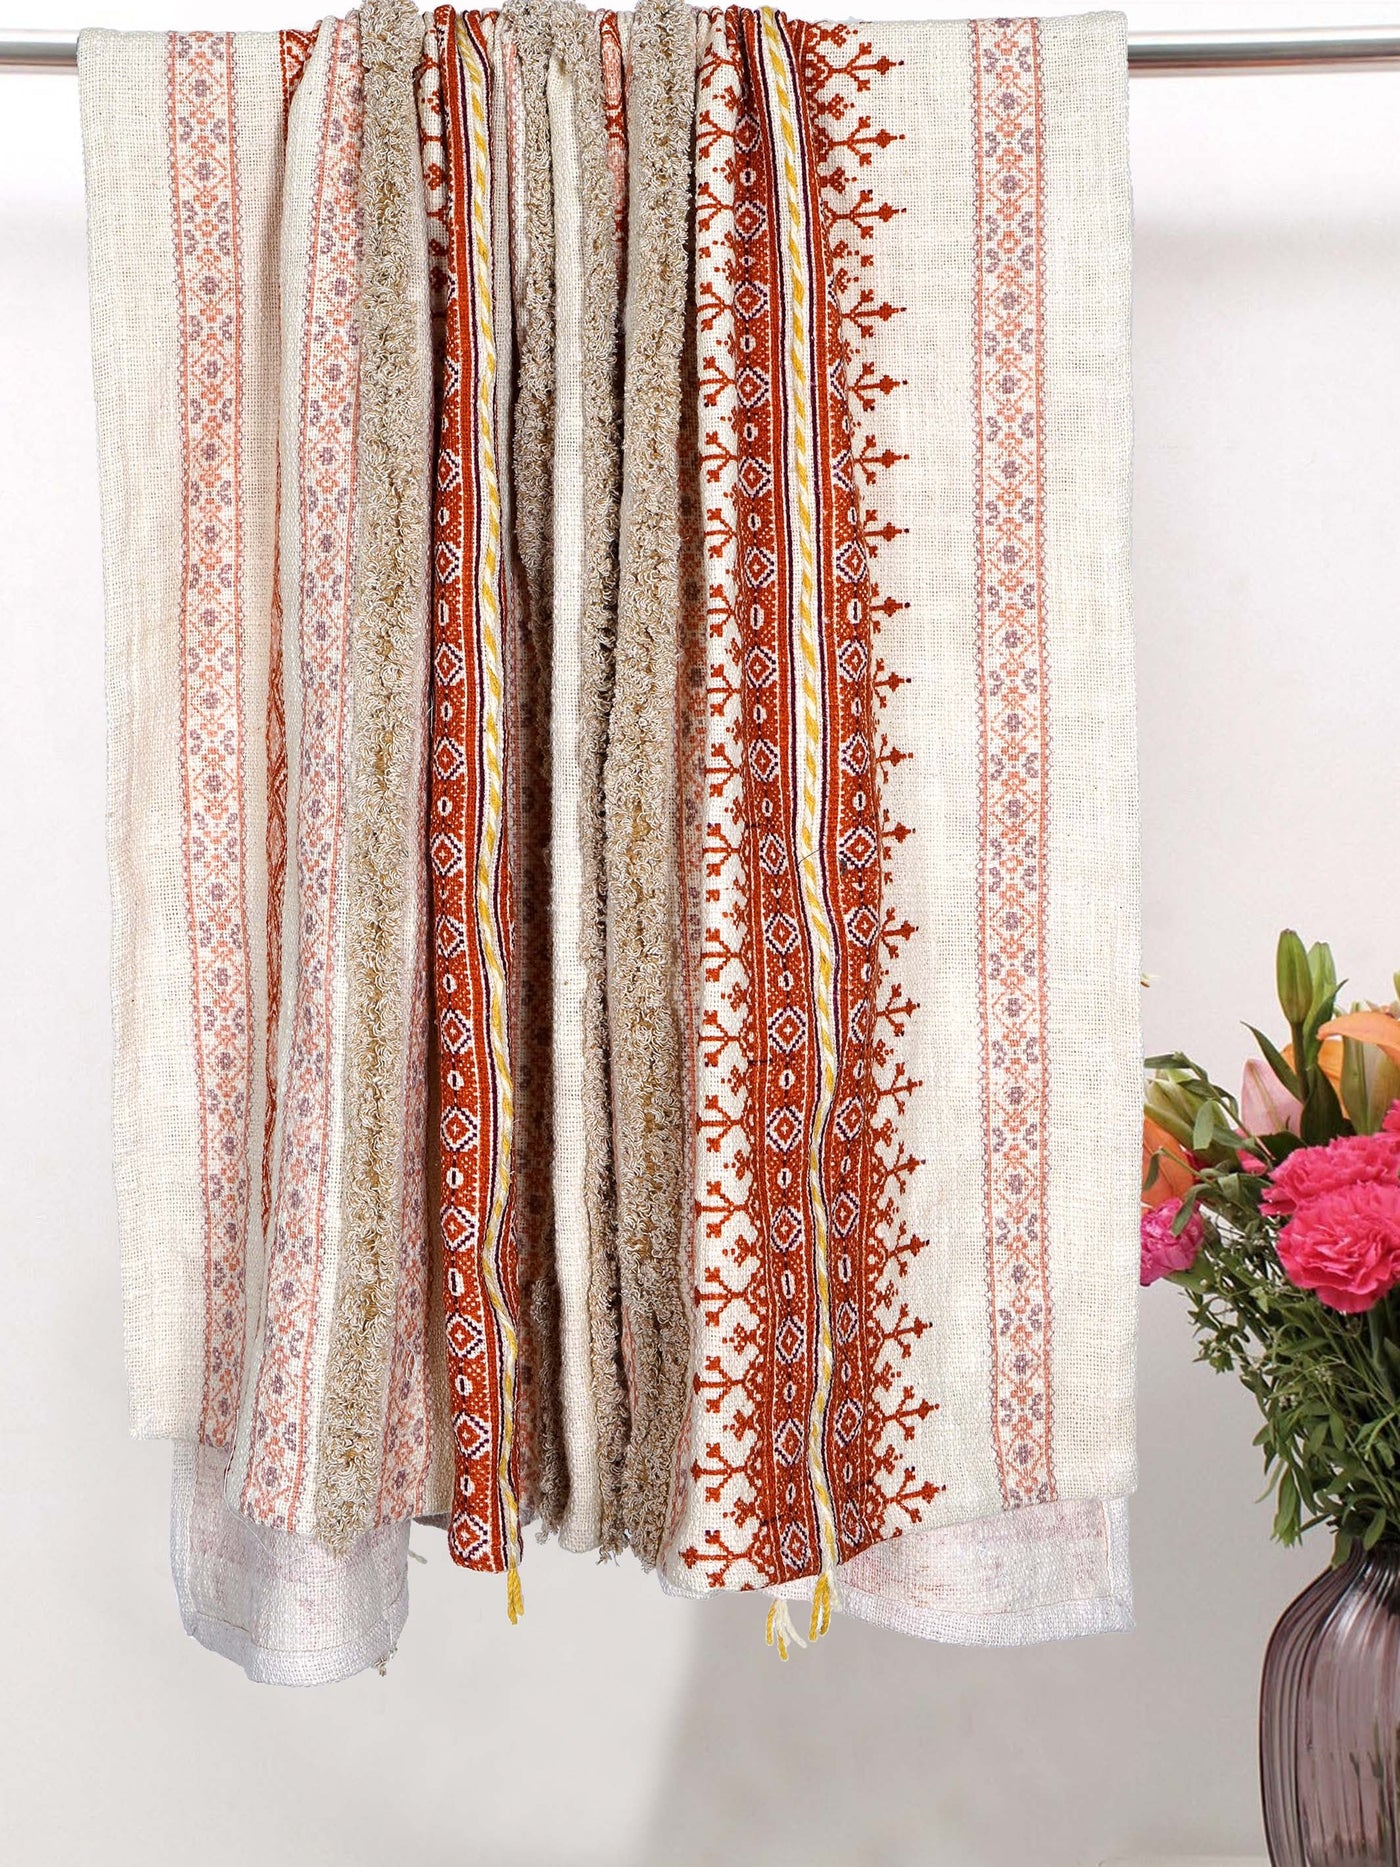 Mihrab Embroidered Throw